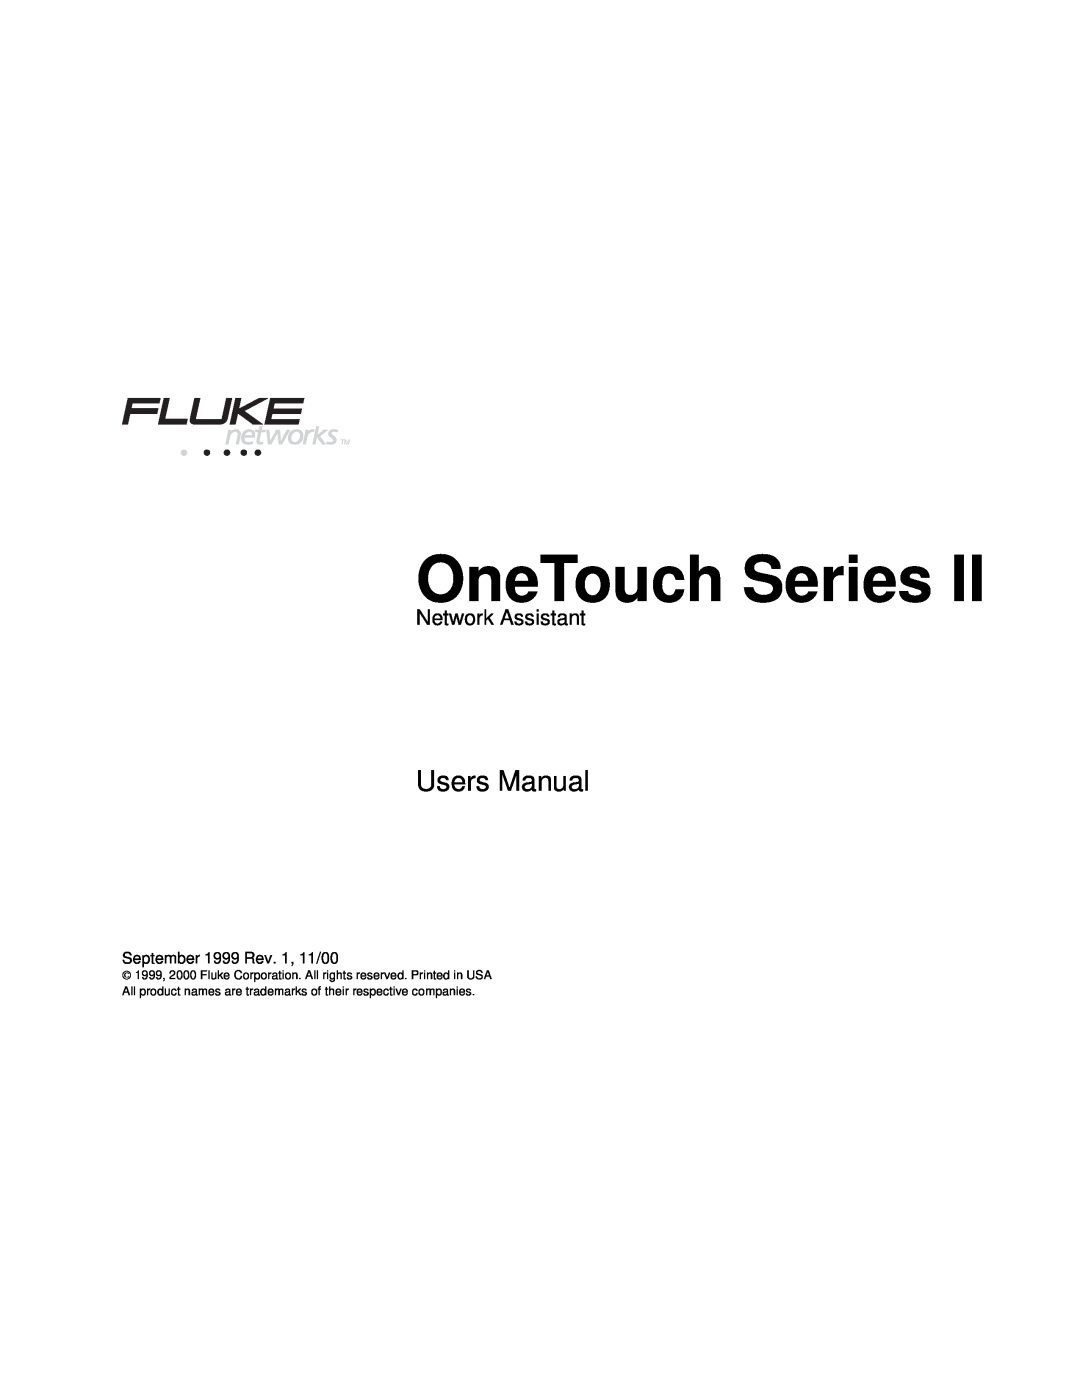 Fluke Series II user manual Network Assistant, OneTouch Series, Users Manual 